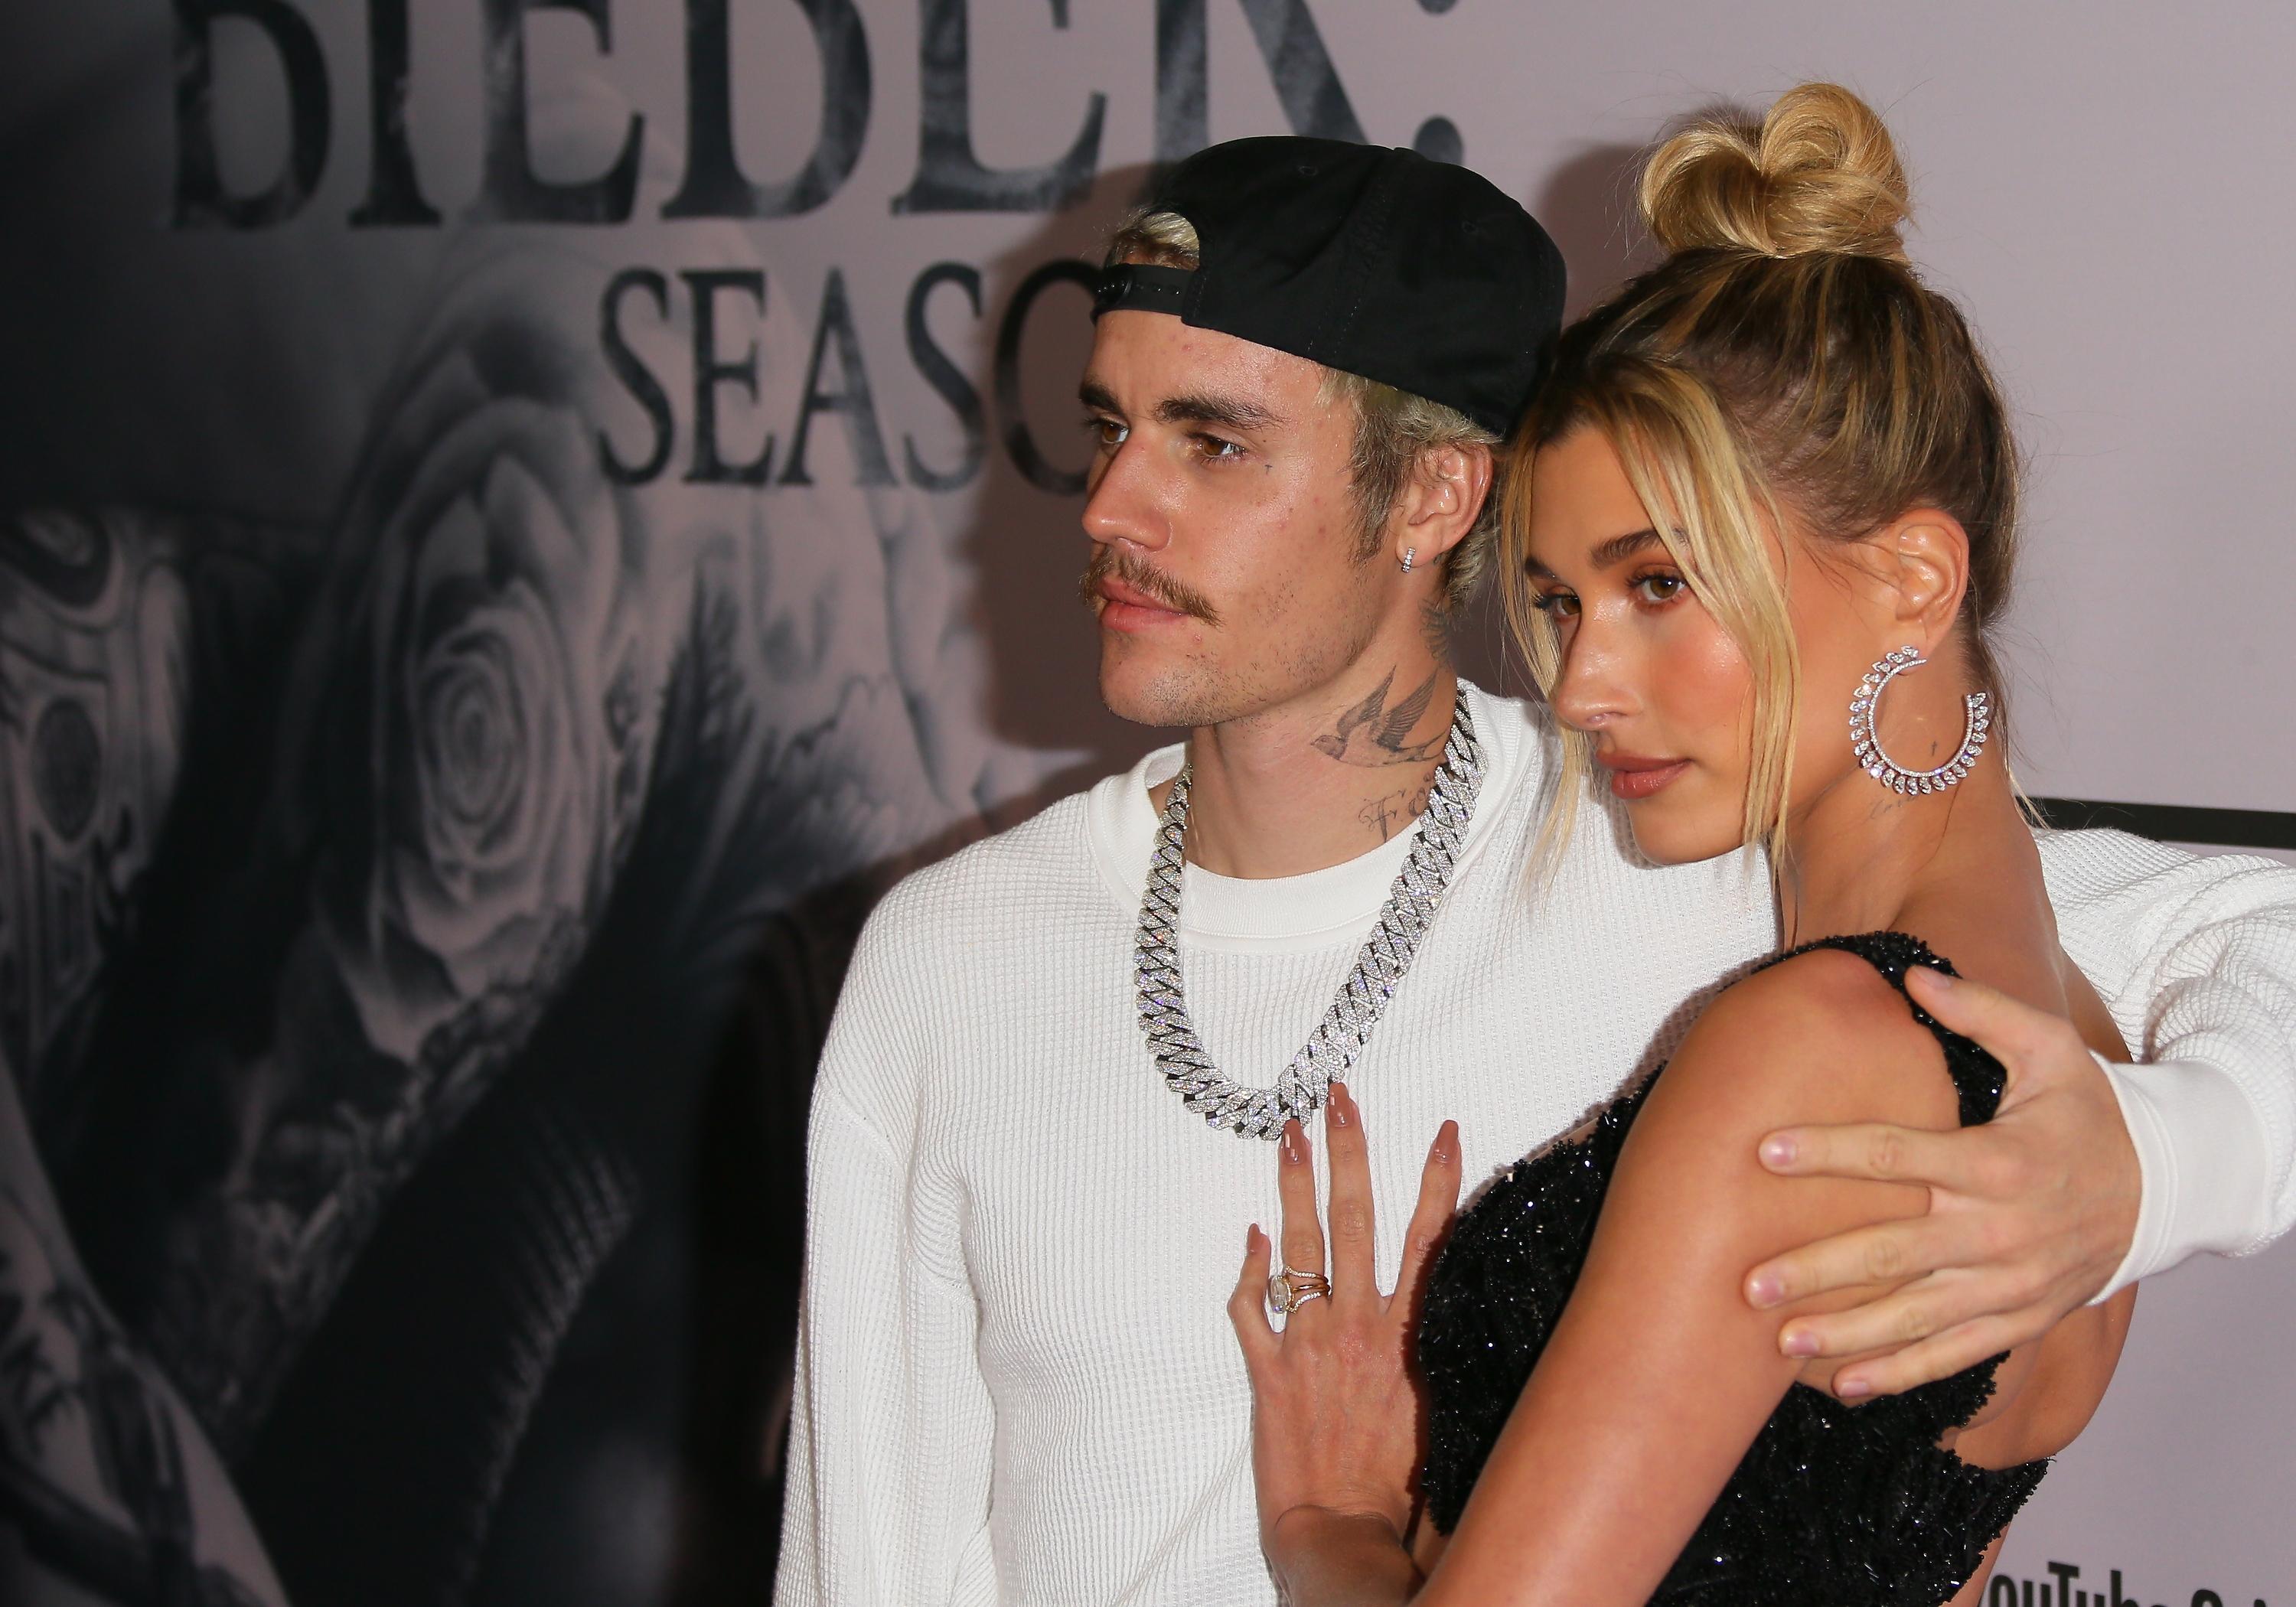 Baby, Baby, Baby Oh: Why Fans Think Hailey Bieber is Pregnant?